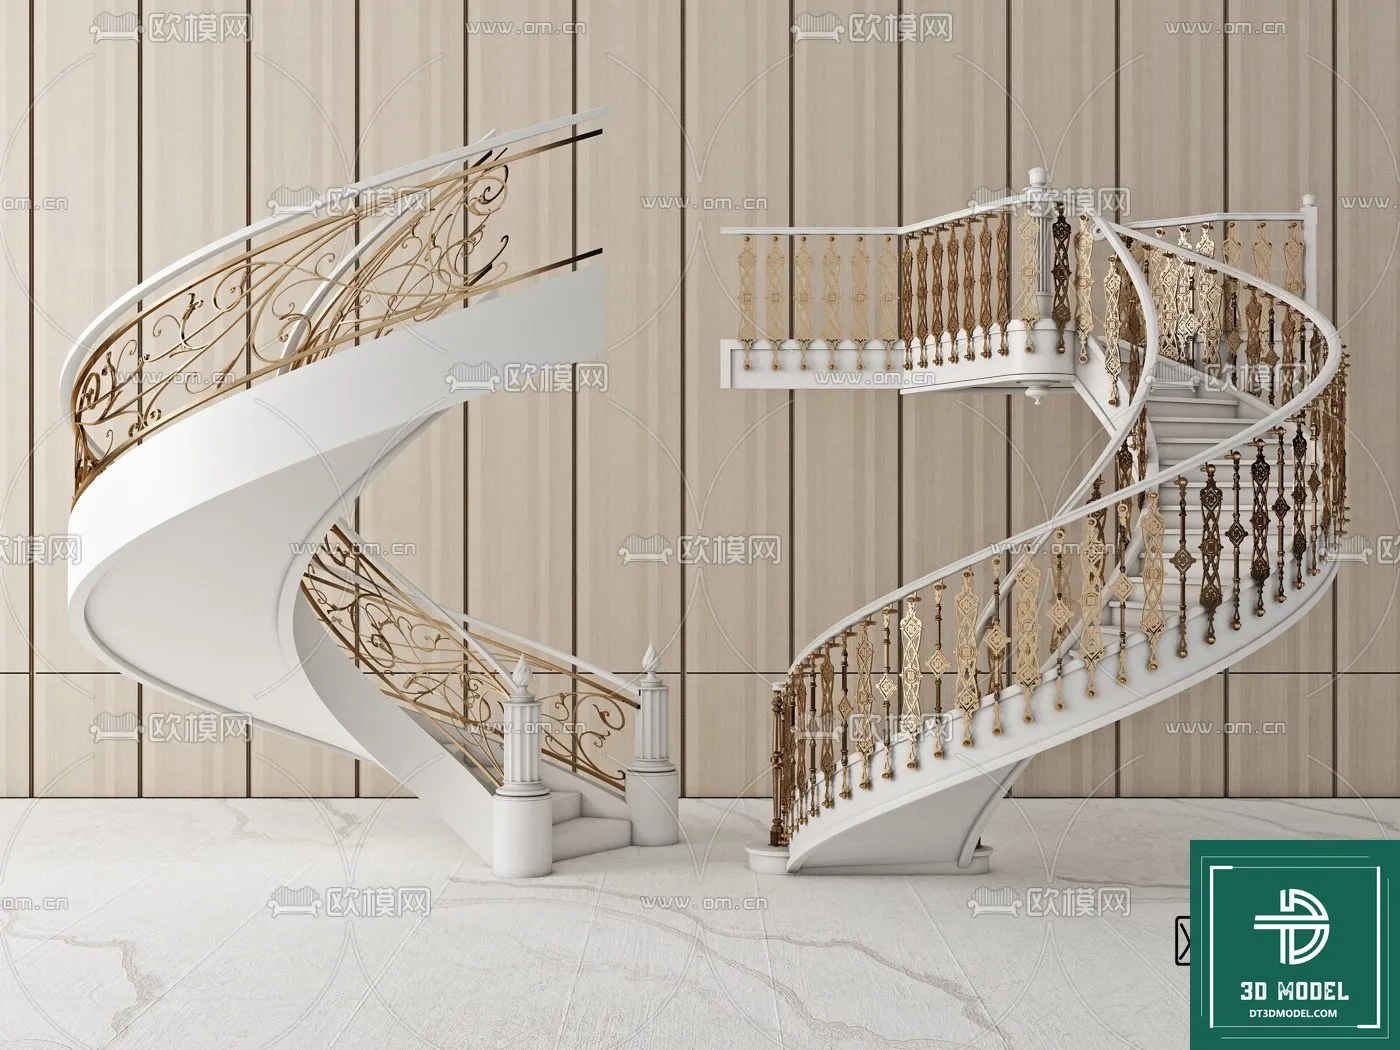 STAIR – 3DS MAX MODELS – 011 – PRO